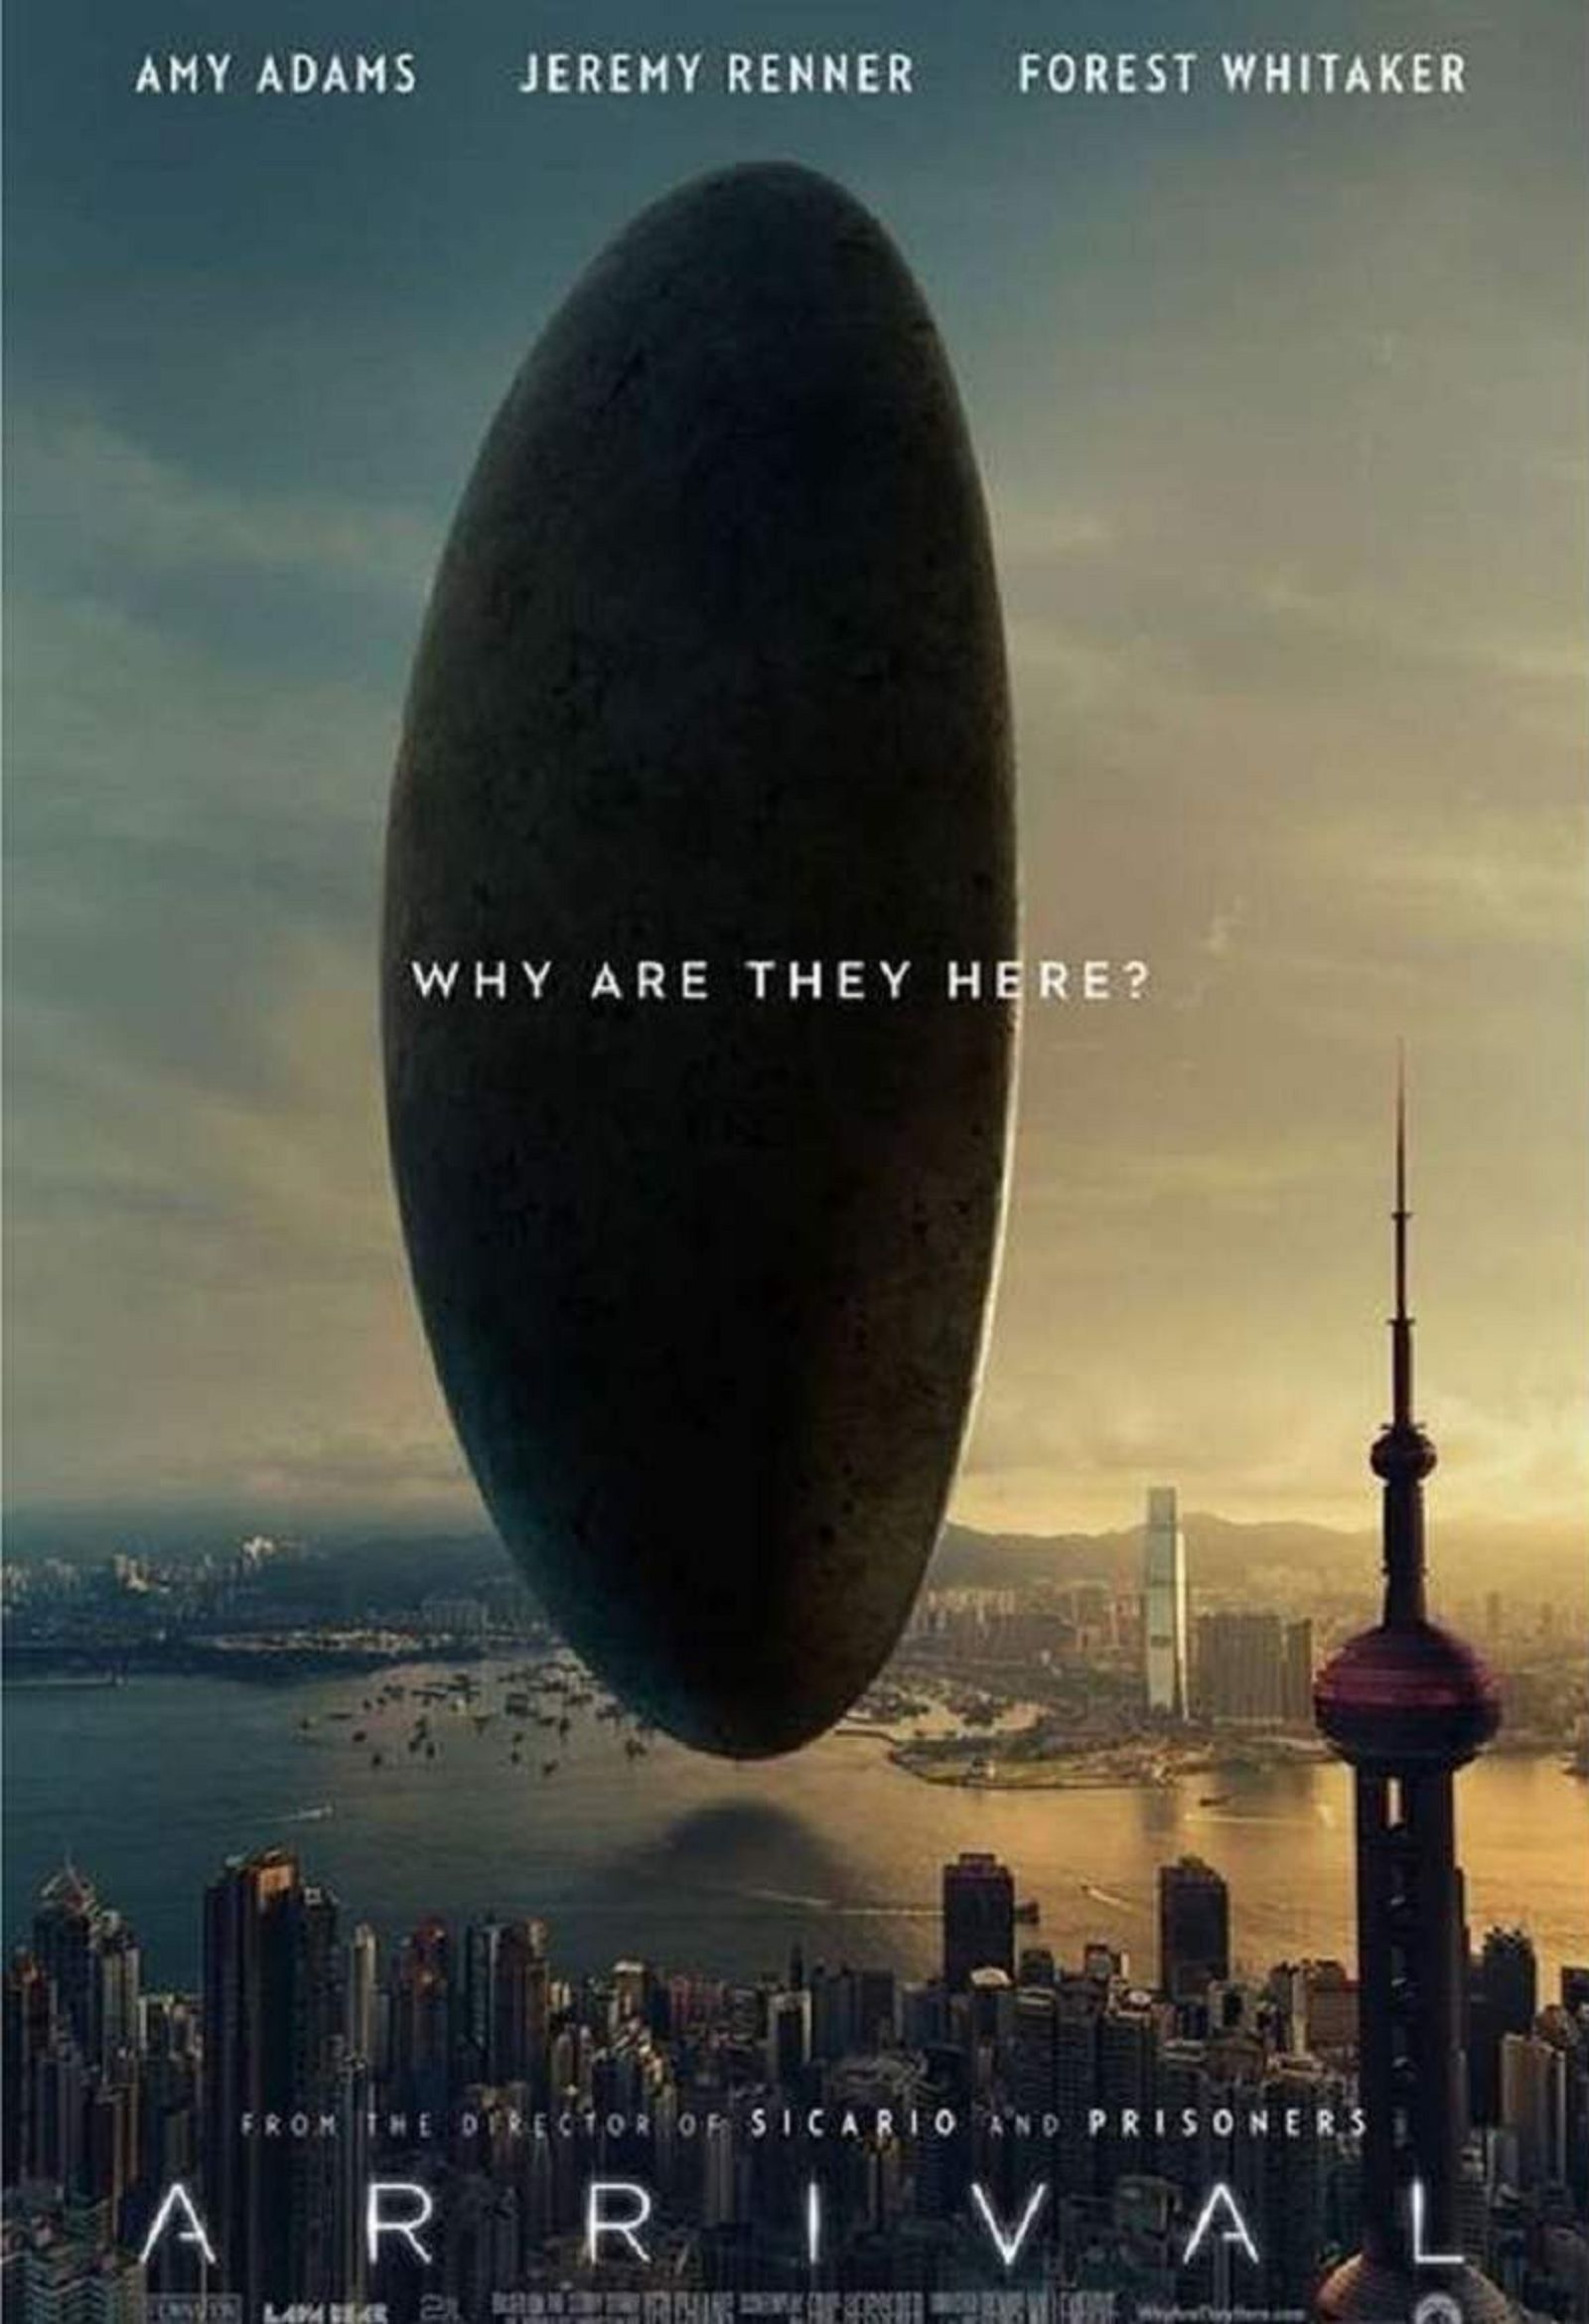 Photoshop Fails Go To The Movies image 4